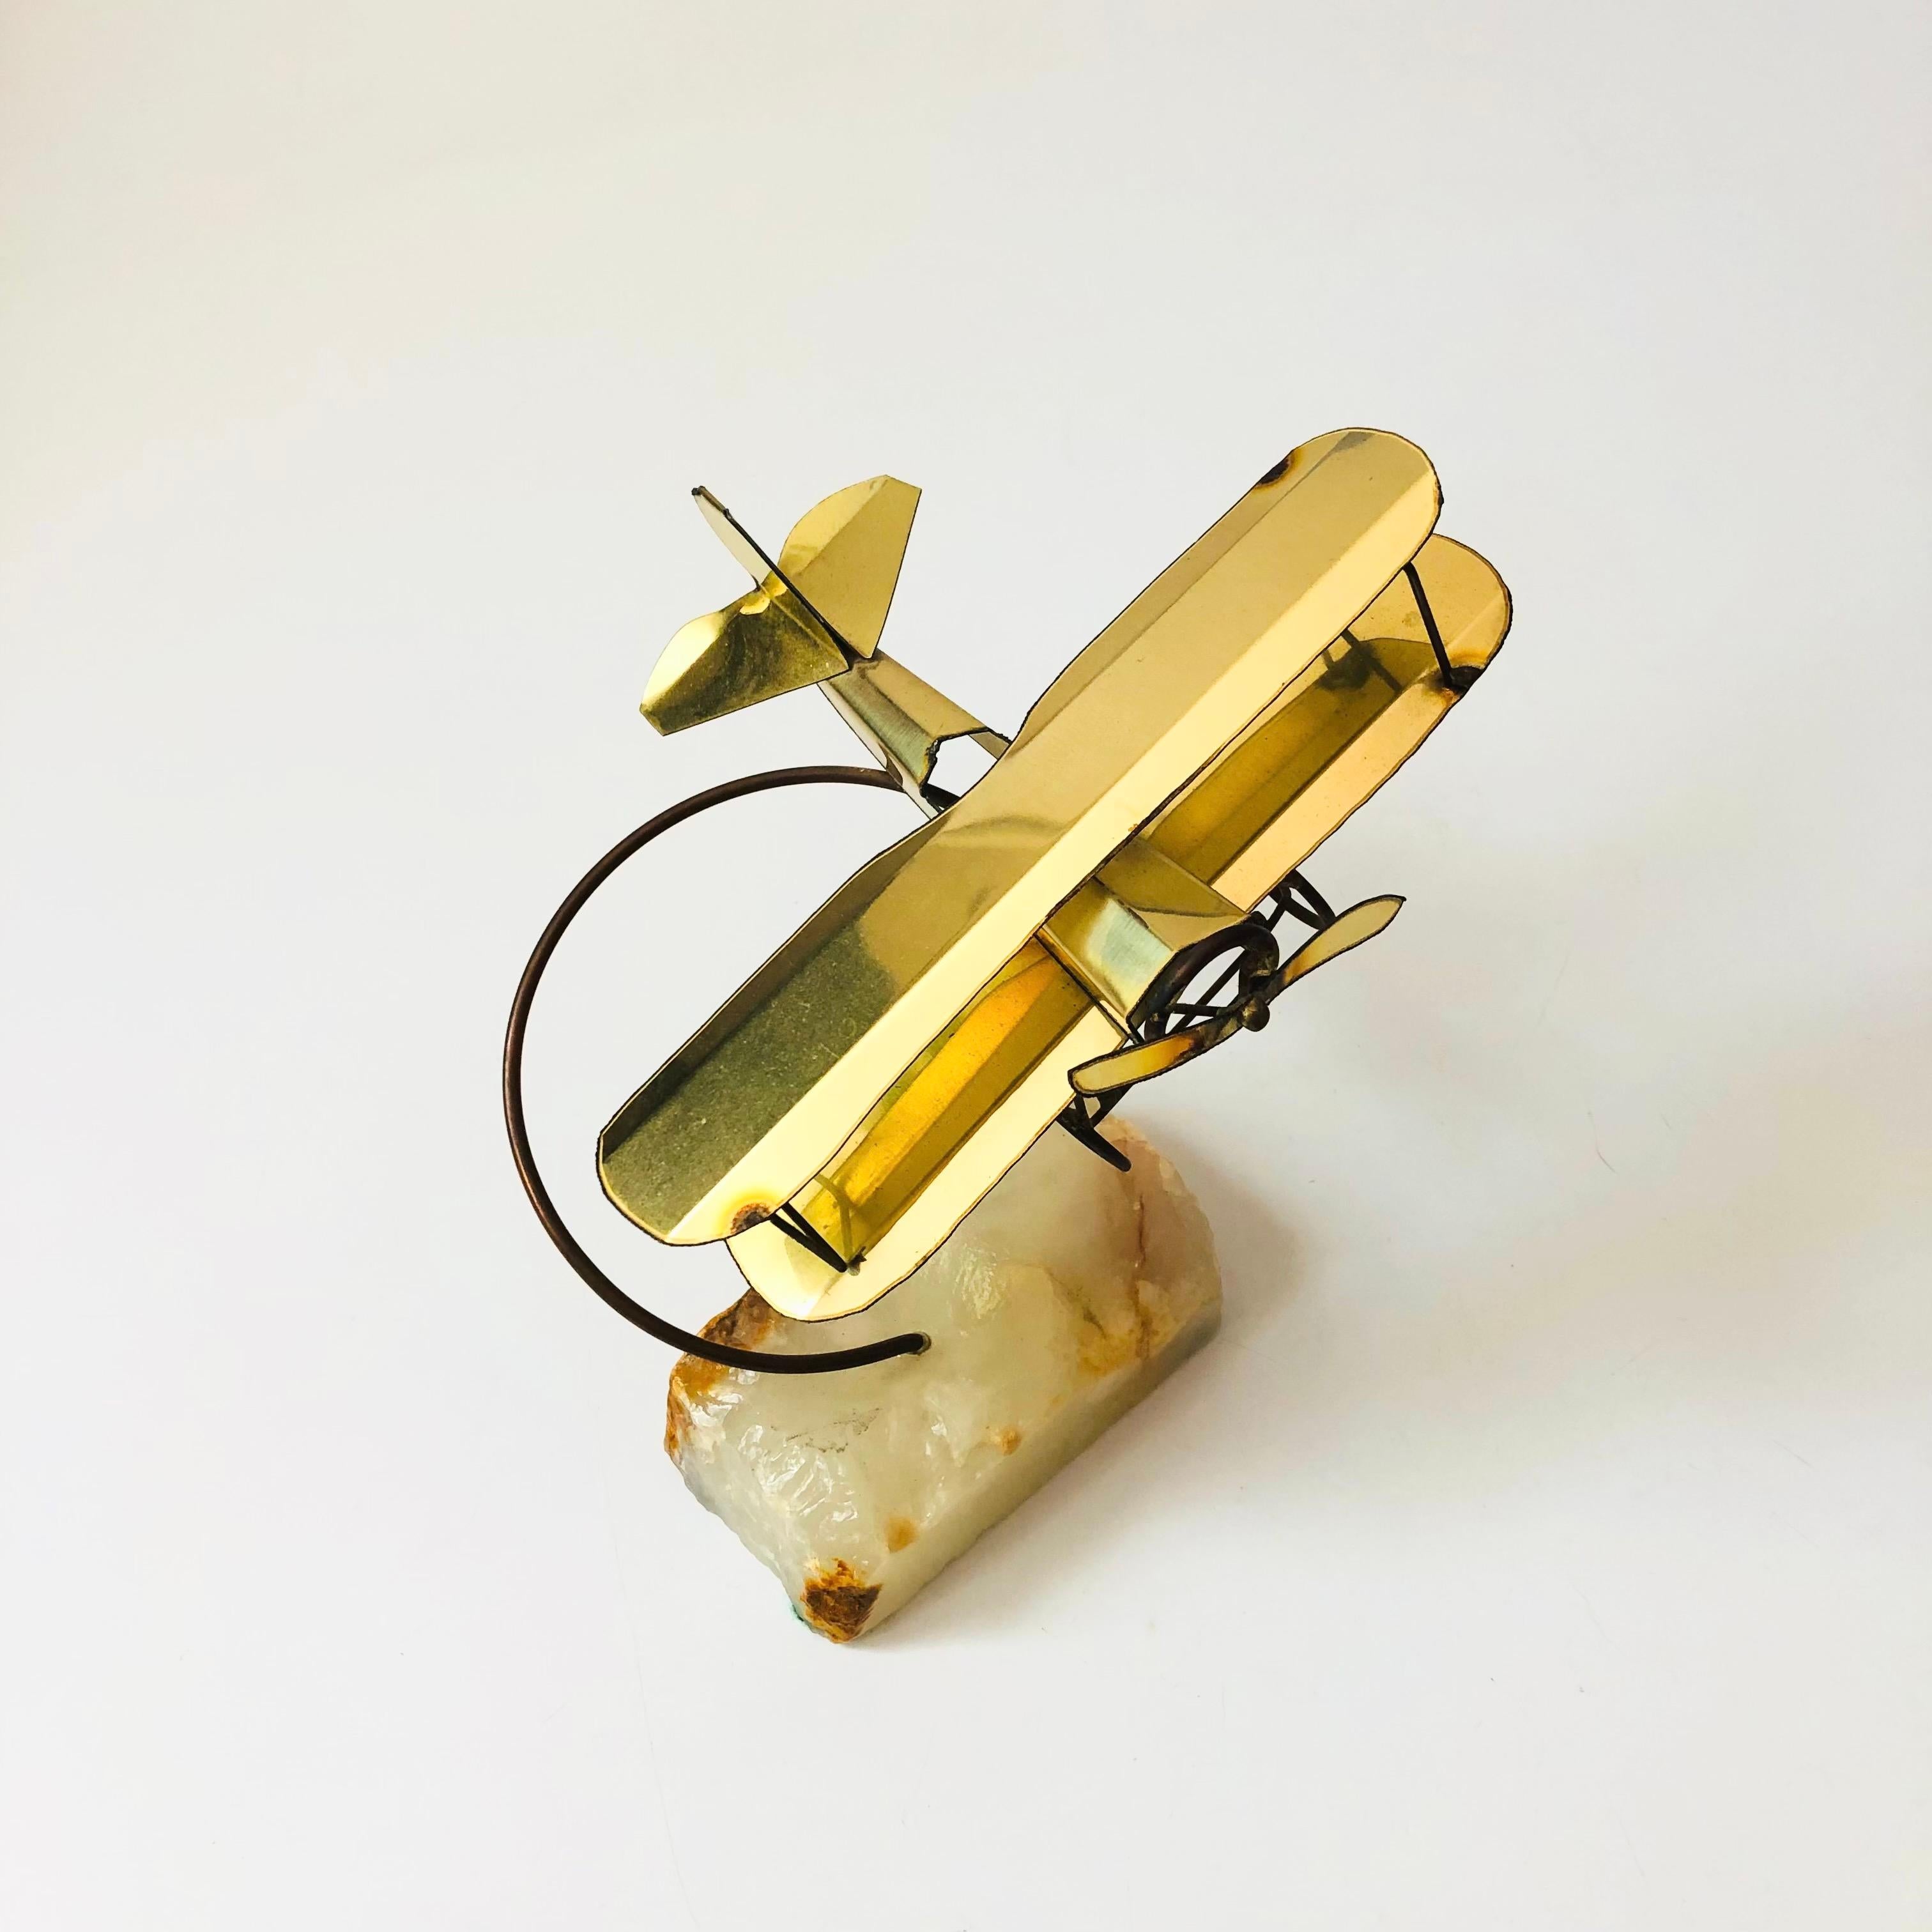 A wonderful vintage biplane sculpture. A Mario Jason Original, made in California, original tag will be attached. Made out of brass sheet metal and affixed to a stone base.

